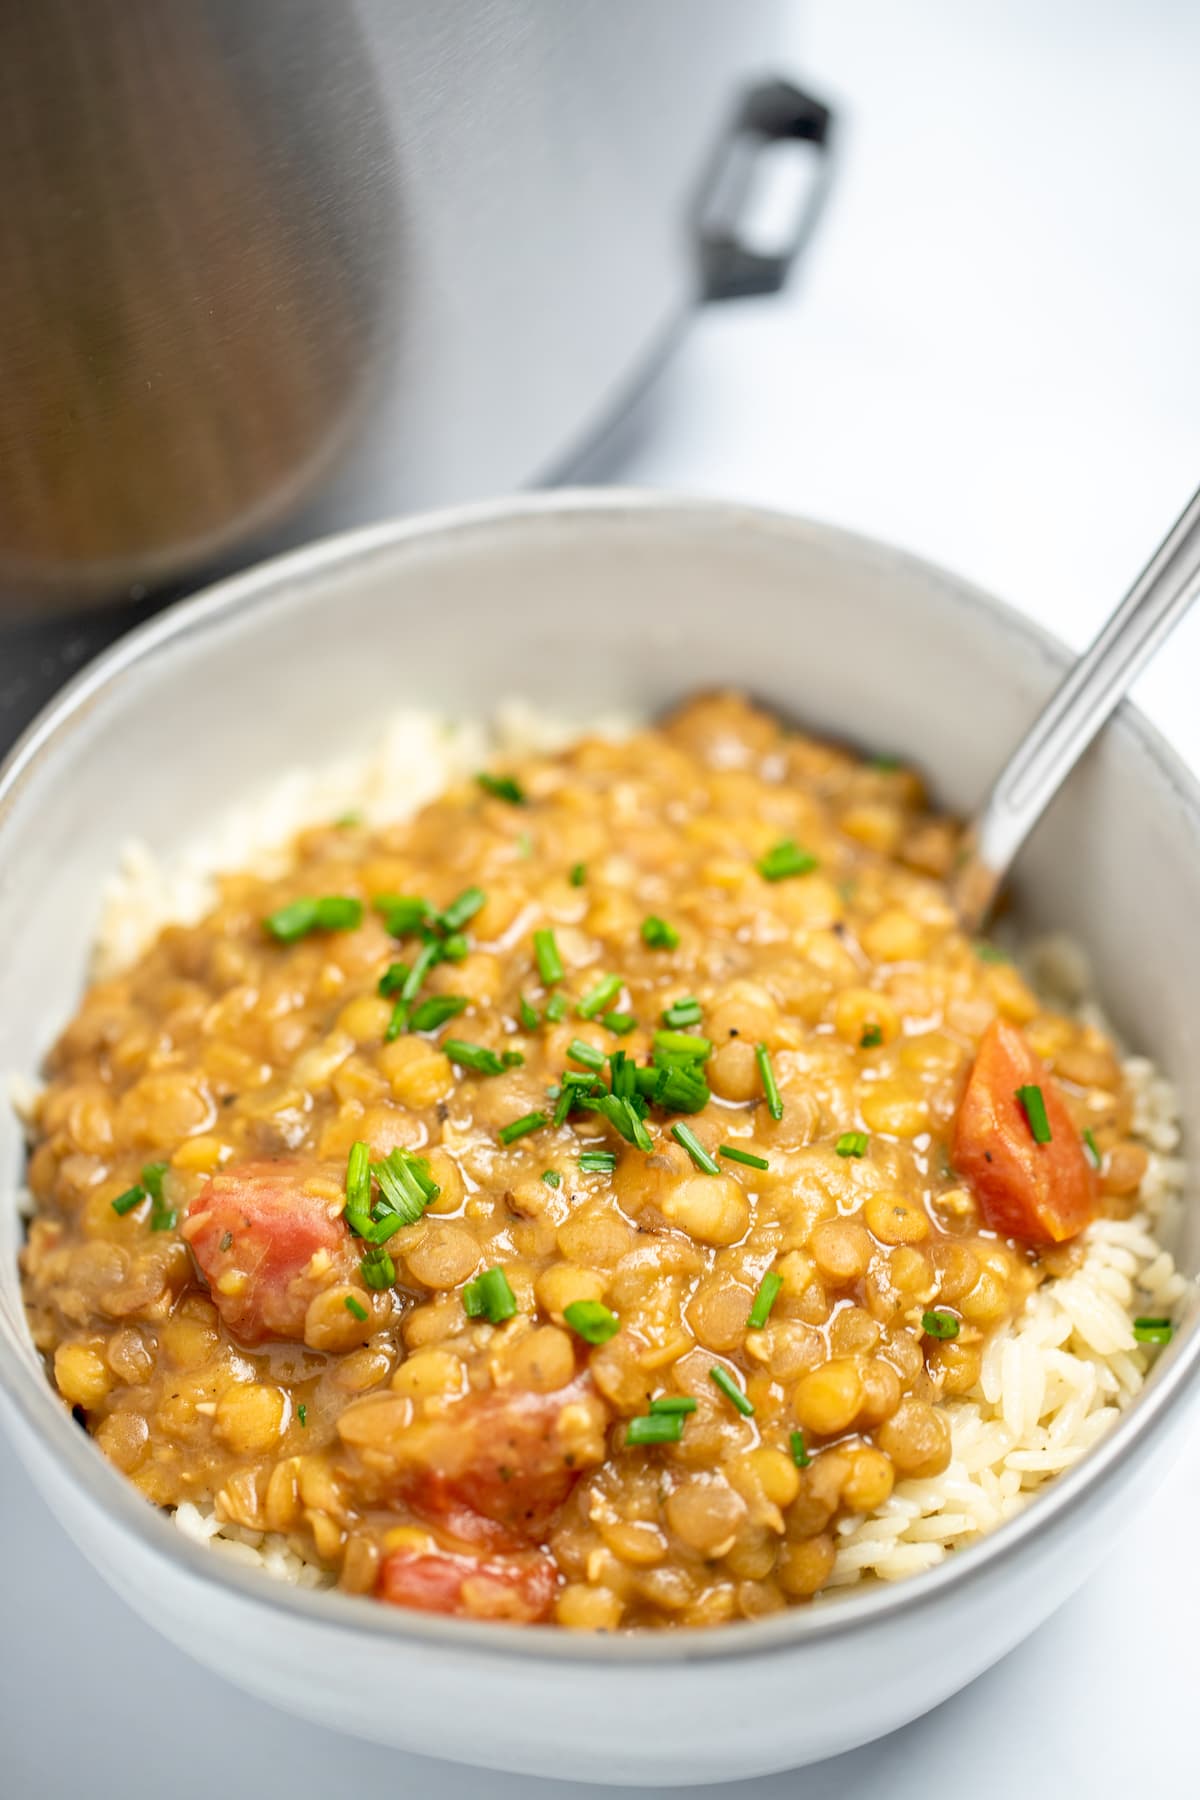 A bowl with rice topped with lentils and chives, with a spoon in the bowl, sitting on a table in front of an instant pot.